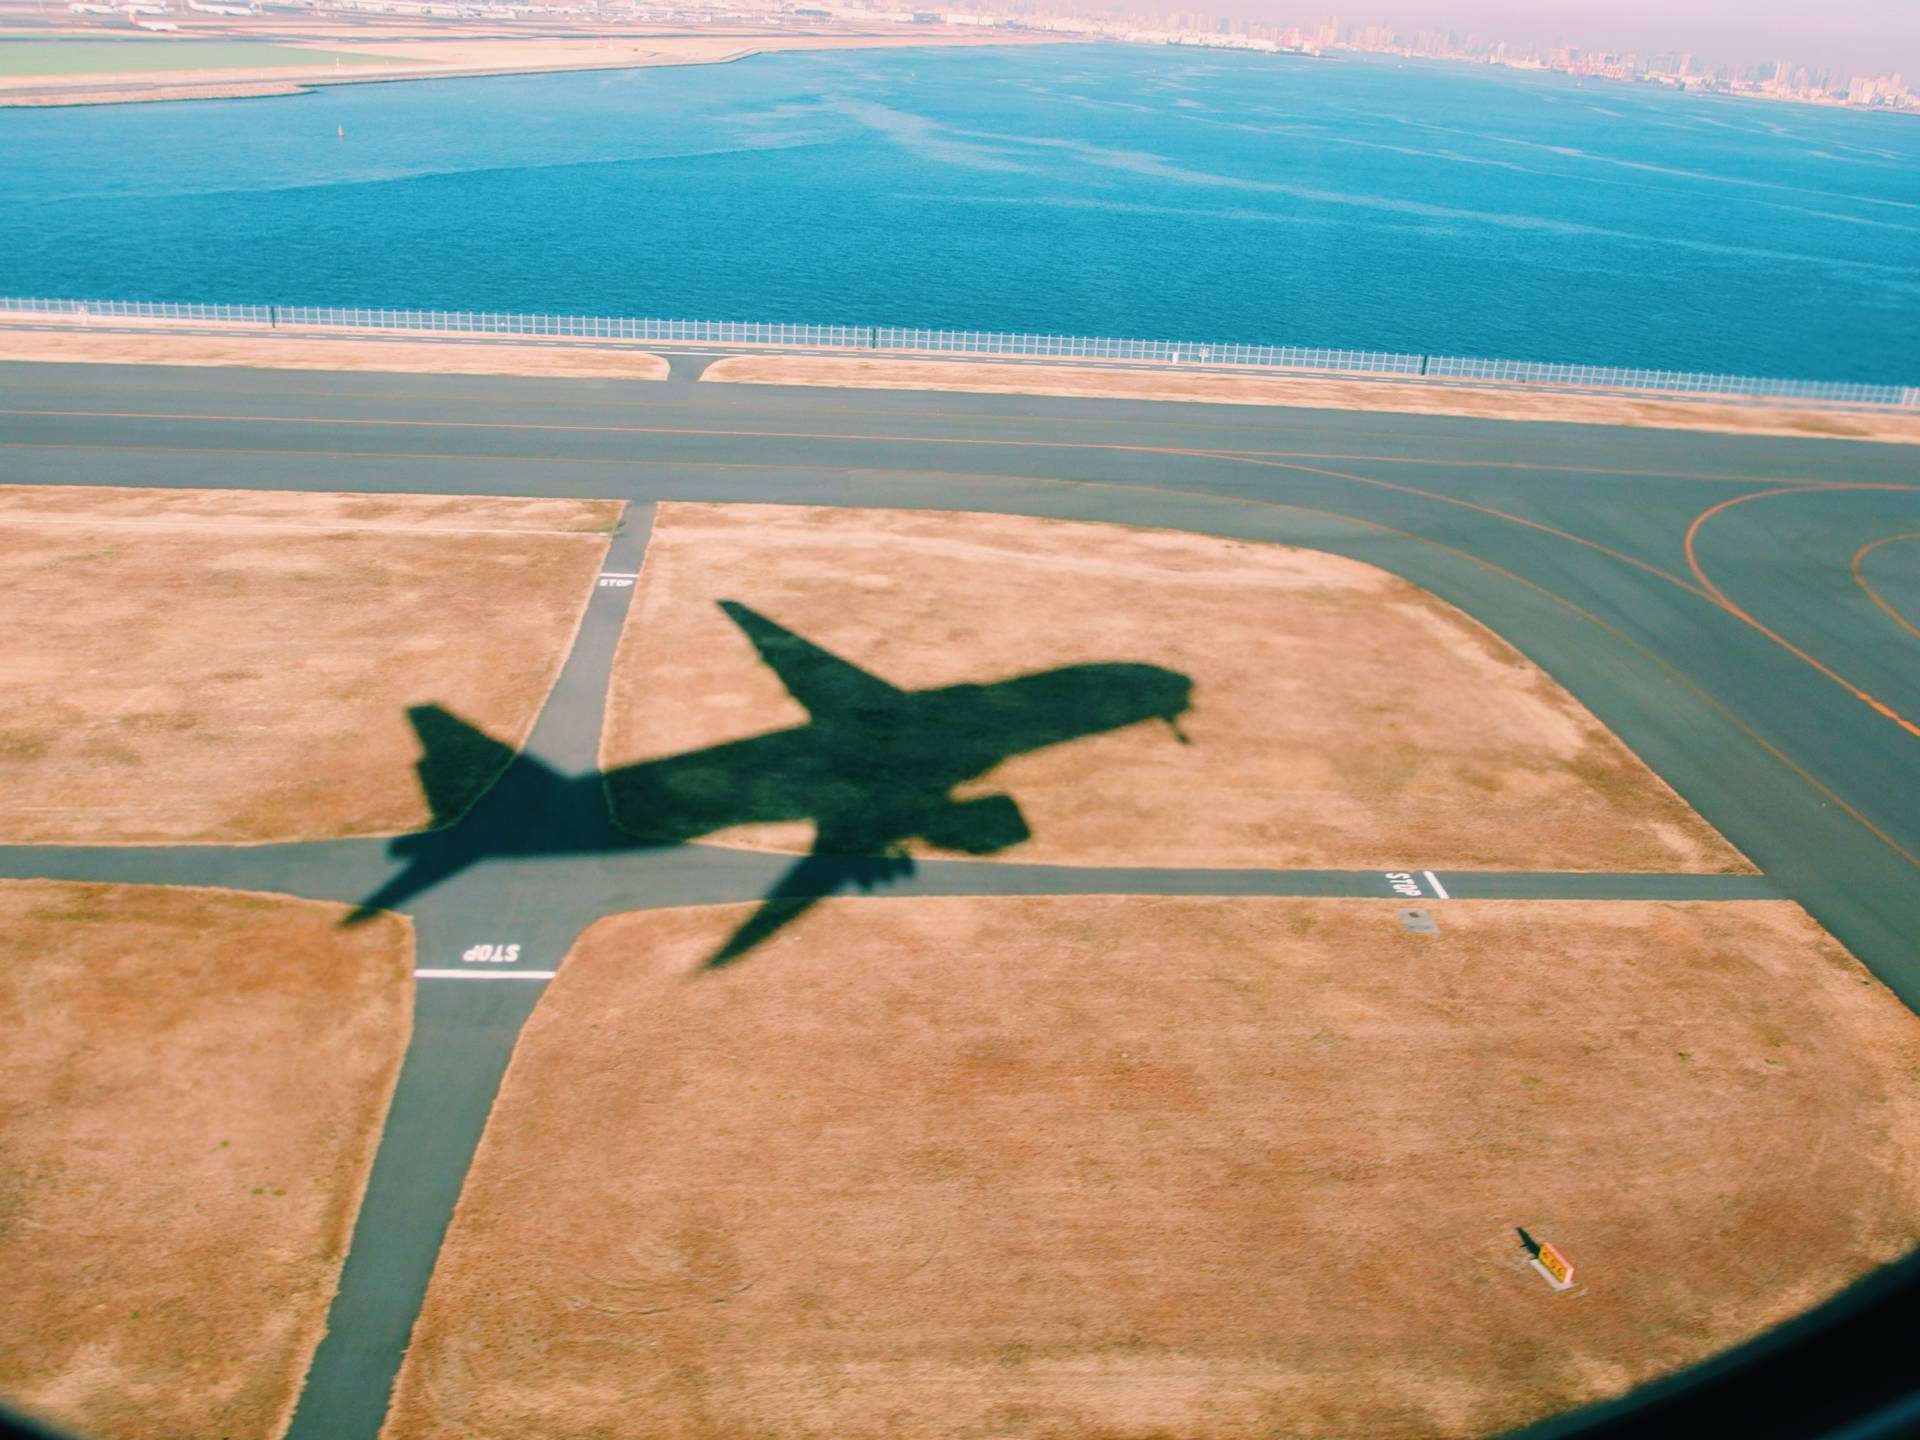 shadow of plan during take off over scorched grass and runway